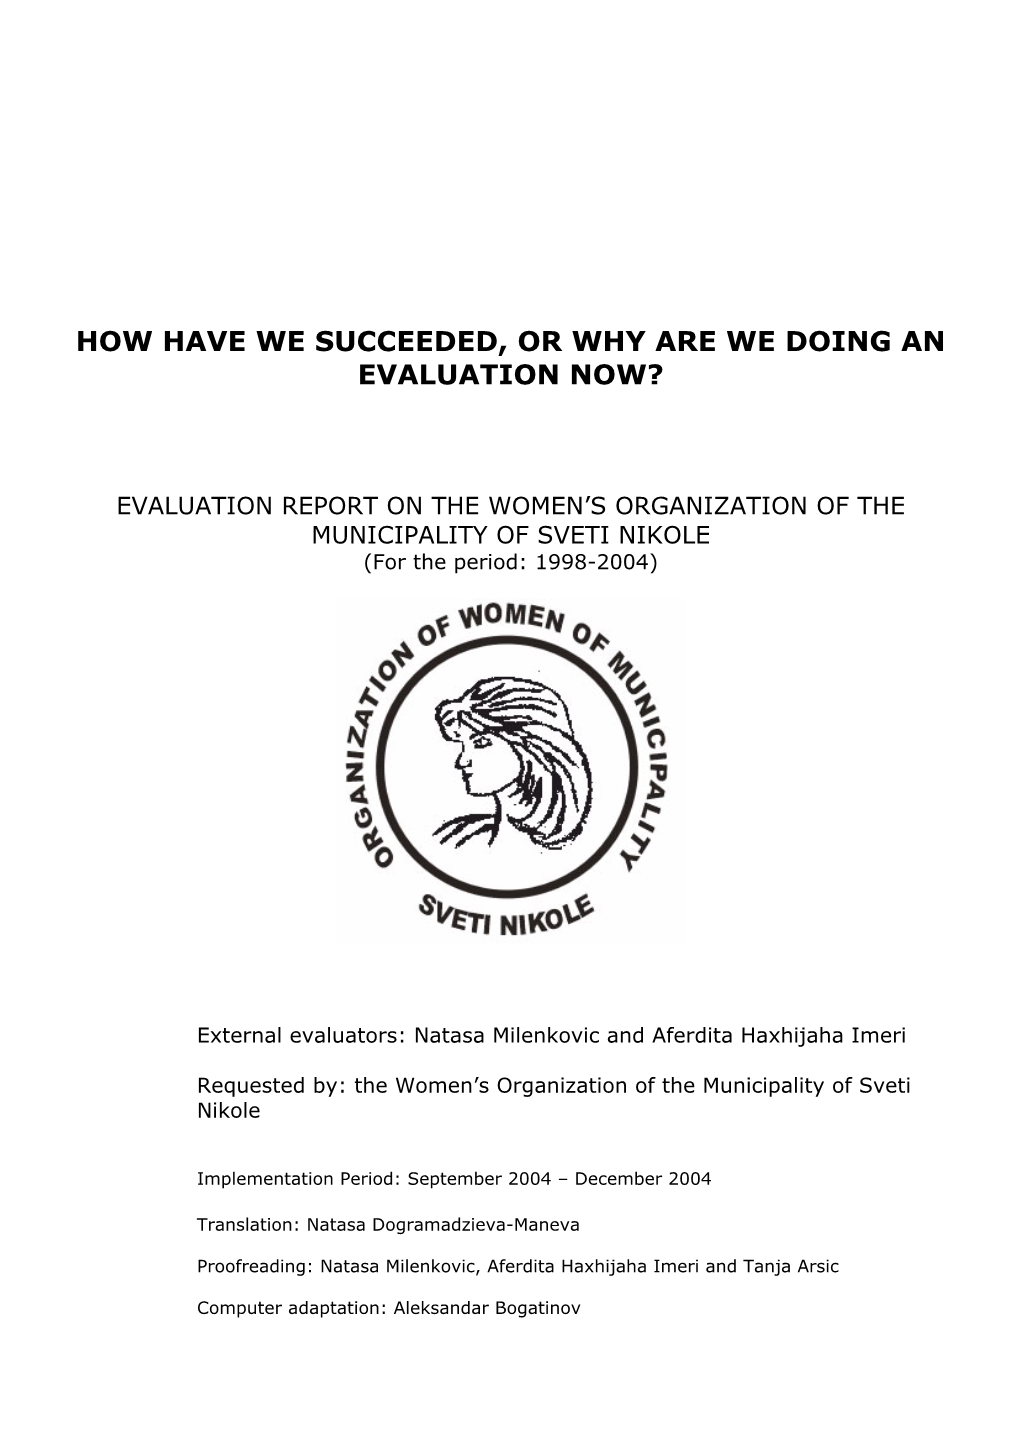 How We Have Succeeded, Or Why Are We Doing Evaluation Right